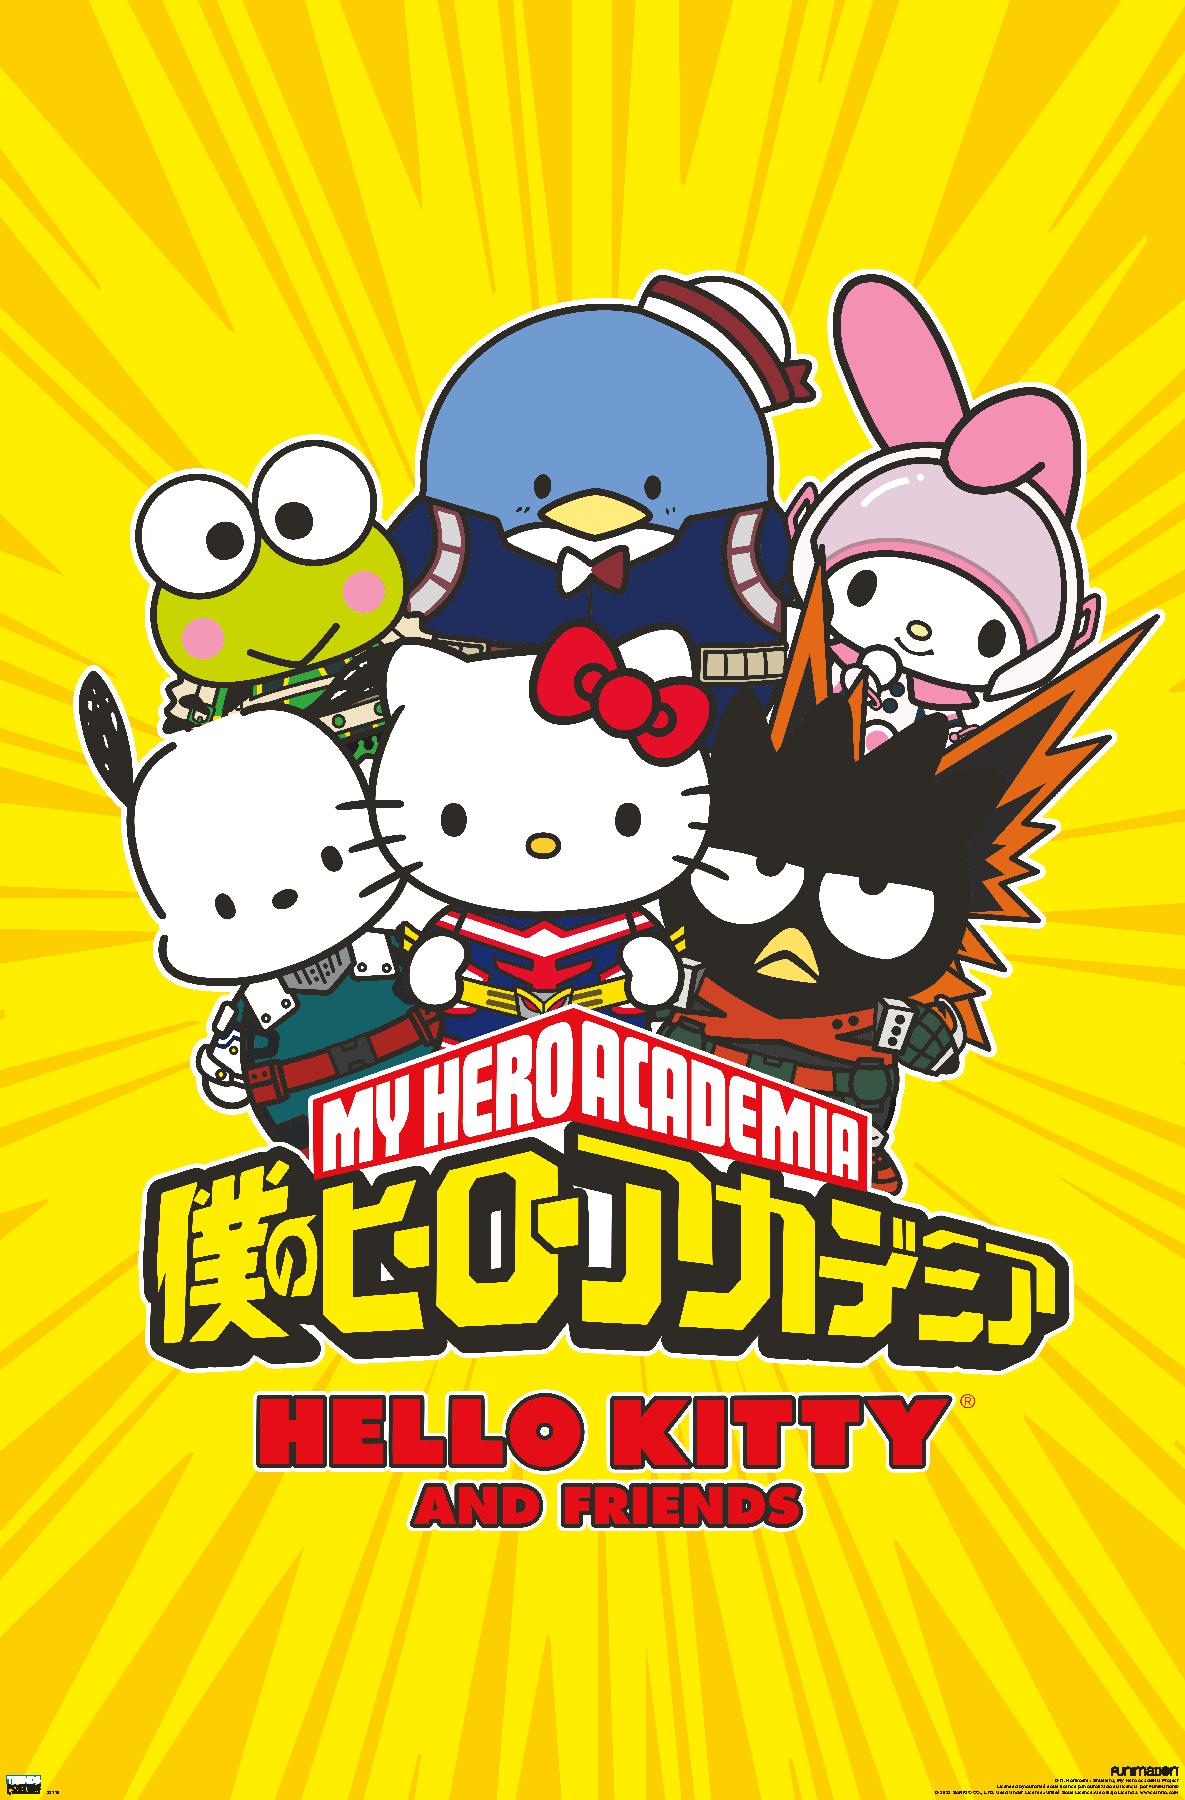 My Hero Academia x Hello Kitty and Friends Wall Poster, 22.375 x 34